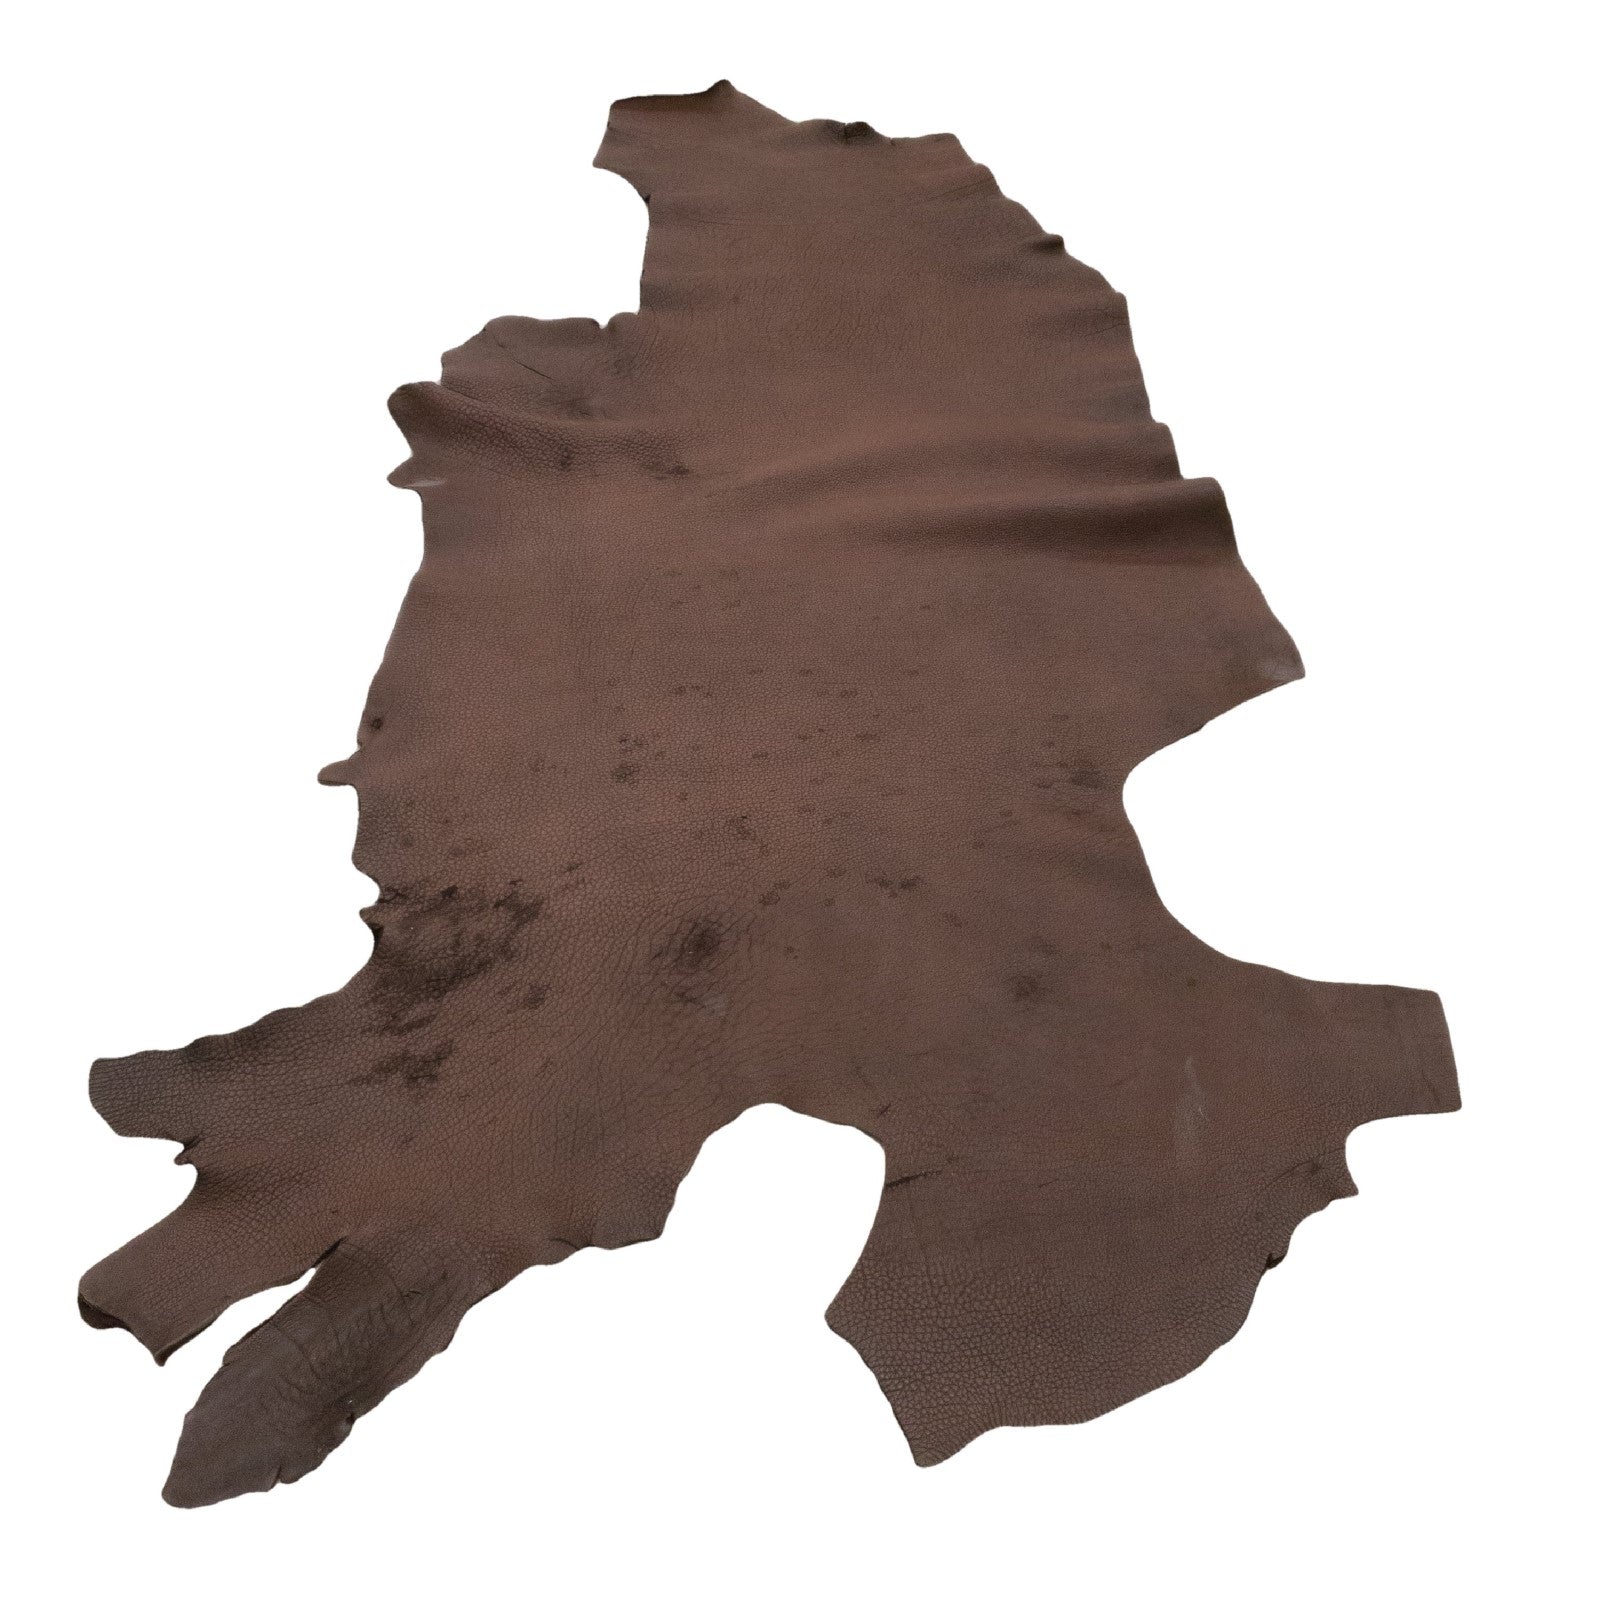 Matte Chocolate Brown, 9-10 oz, 20 Sq Ft, Bison Side,  | The Leather Guy